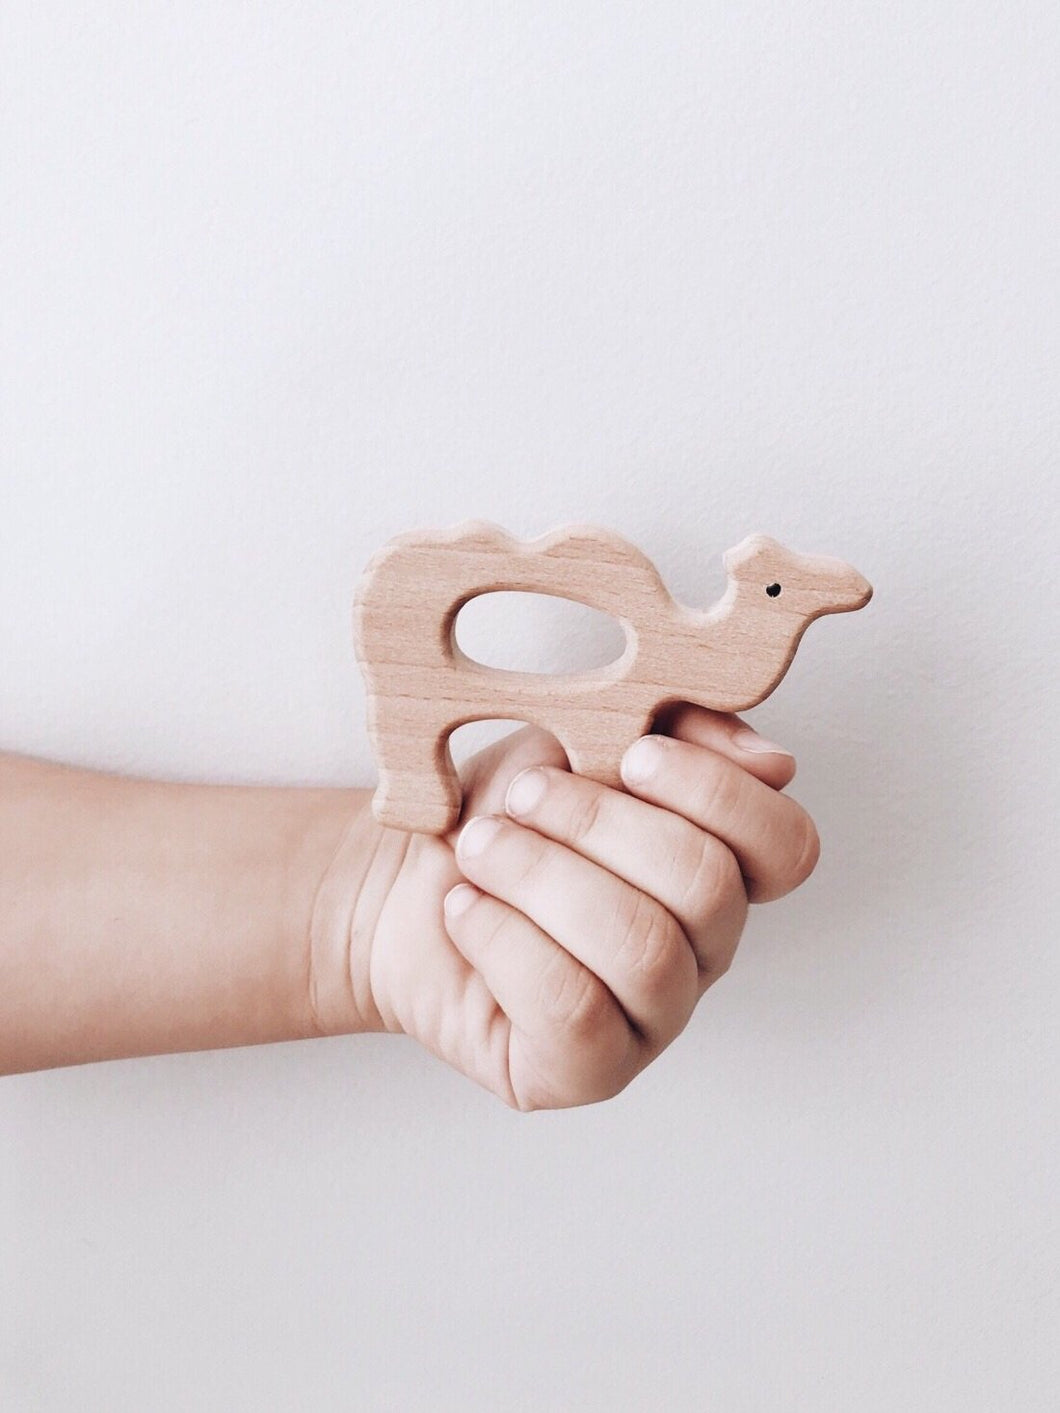 Lion + Lamb the Label ECO CAMEL TEETHER